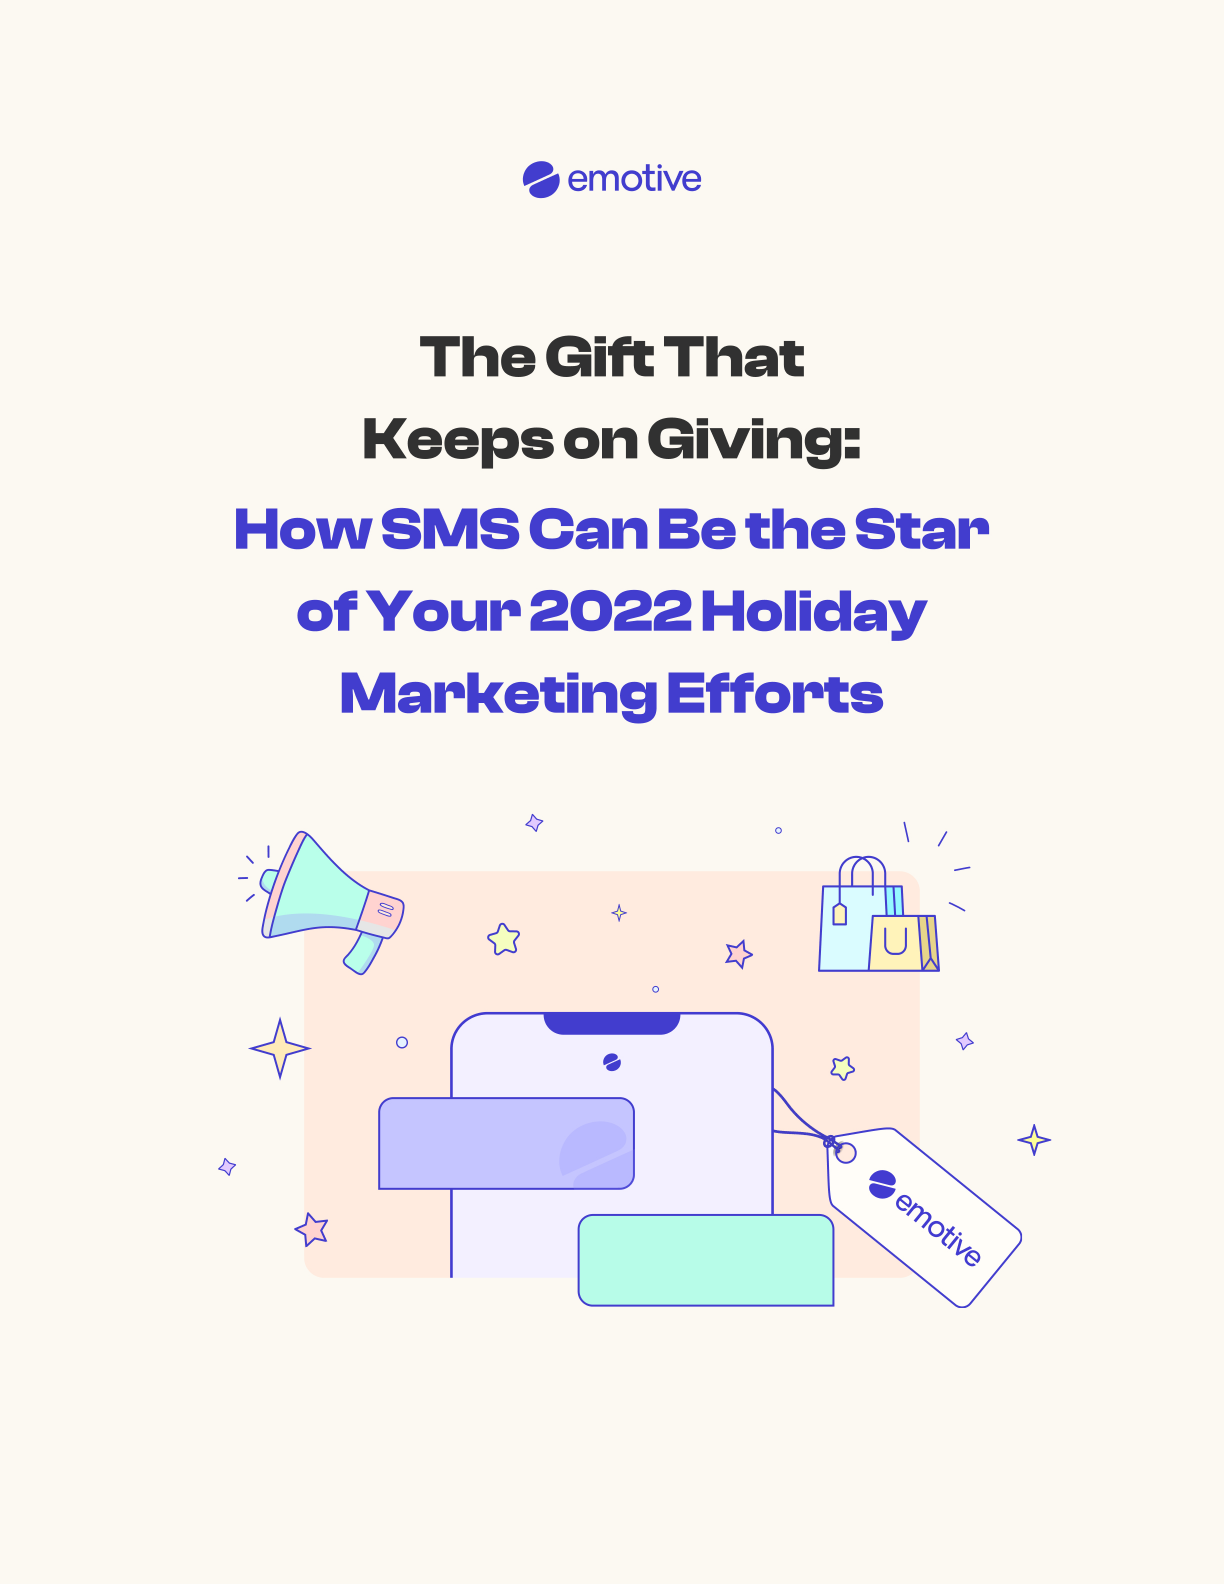 A SMS Guide for BFCM: How SMS Marketing Can Maximize Your 2022 Holiday Sales Featured Image